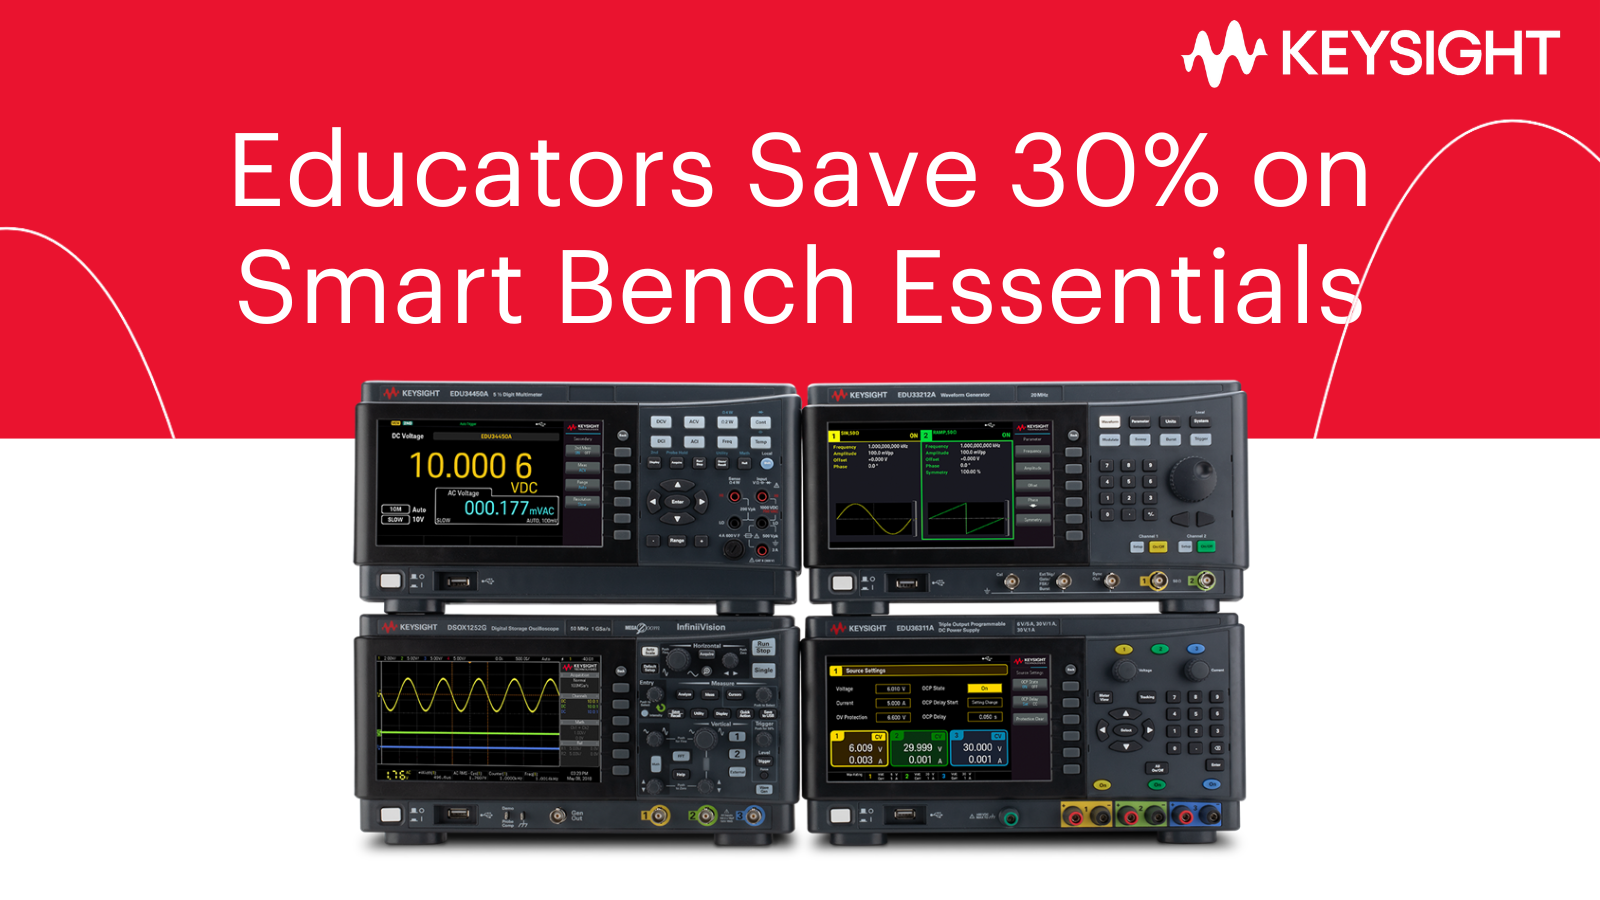 33% off Data Acquisition Tools and Power Meters